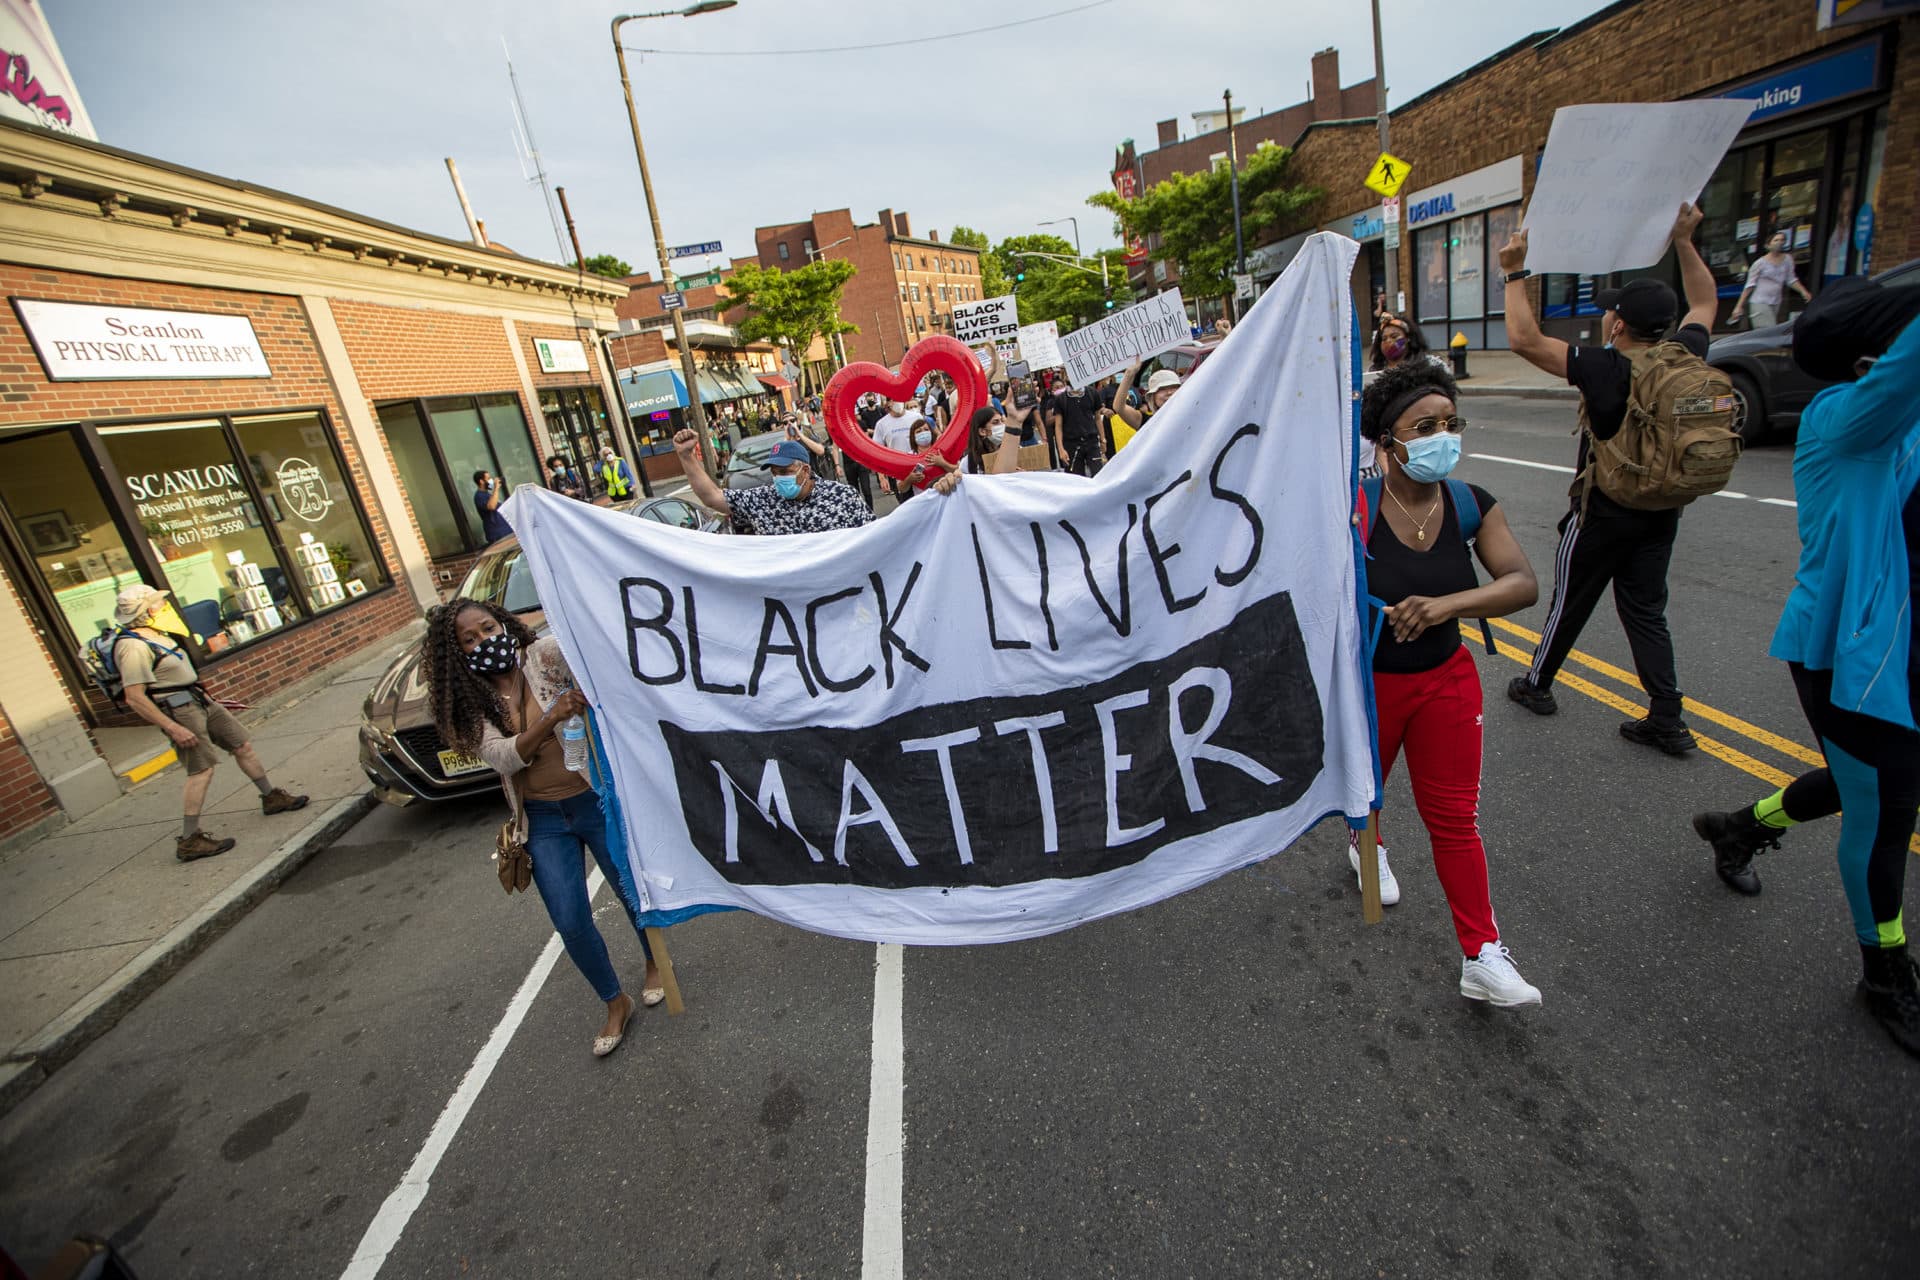 Protesters begin their march down Centre Street towards the Boston Police E-13 District station in Jamaica Plain. (Jesse Costa/WBUR)